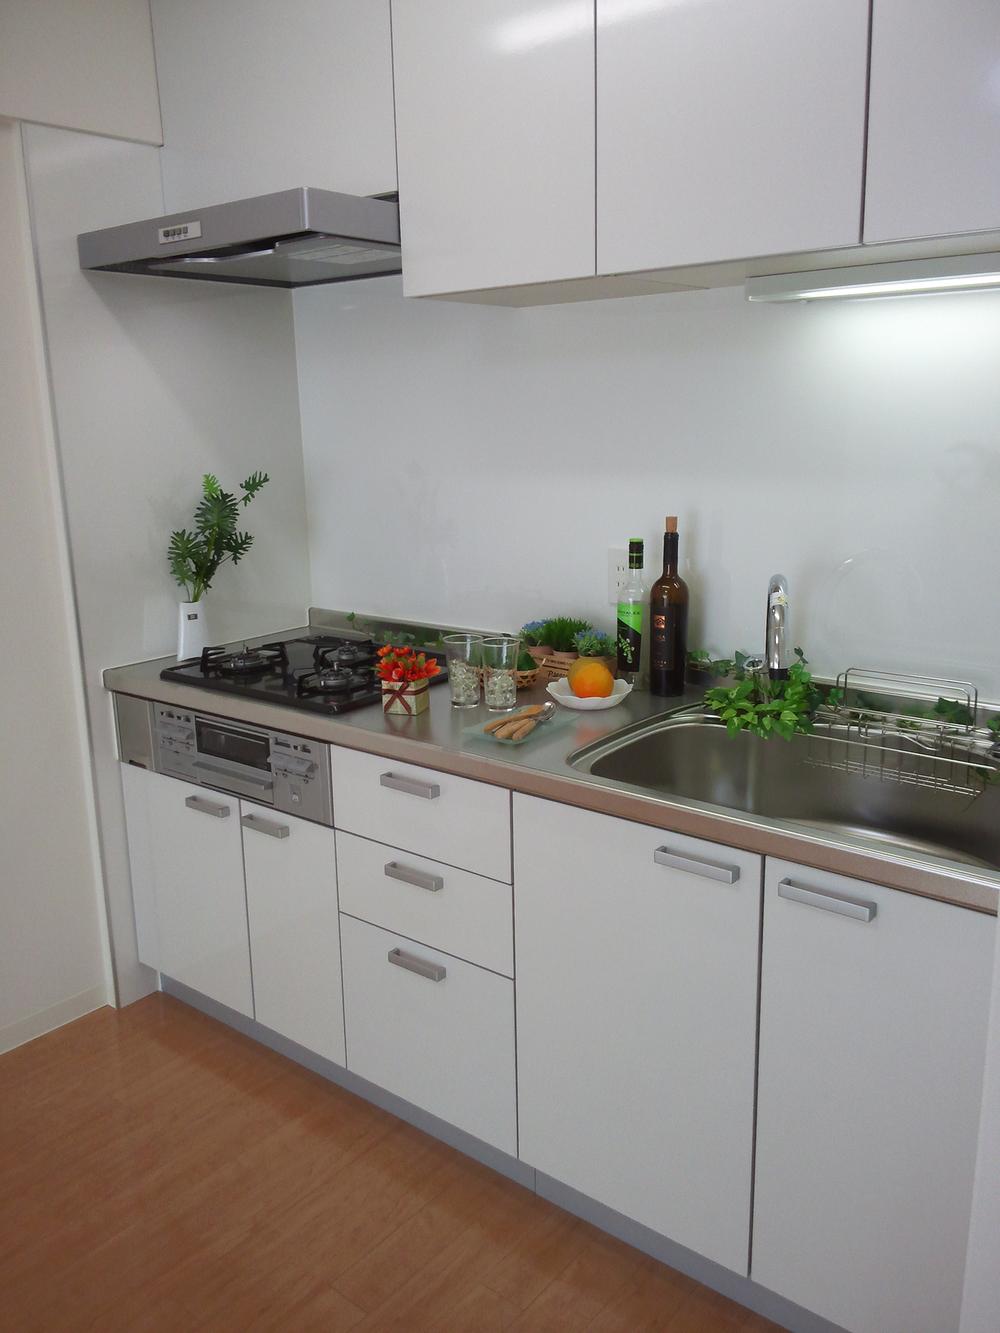 Kitchen. Will happily our cuisine in a beautiful system Kitchen